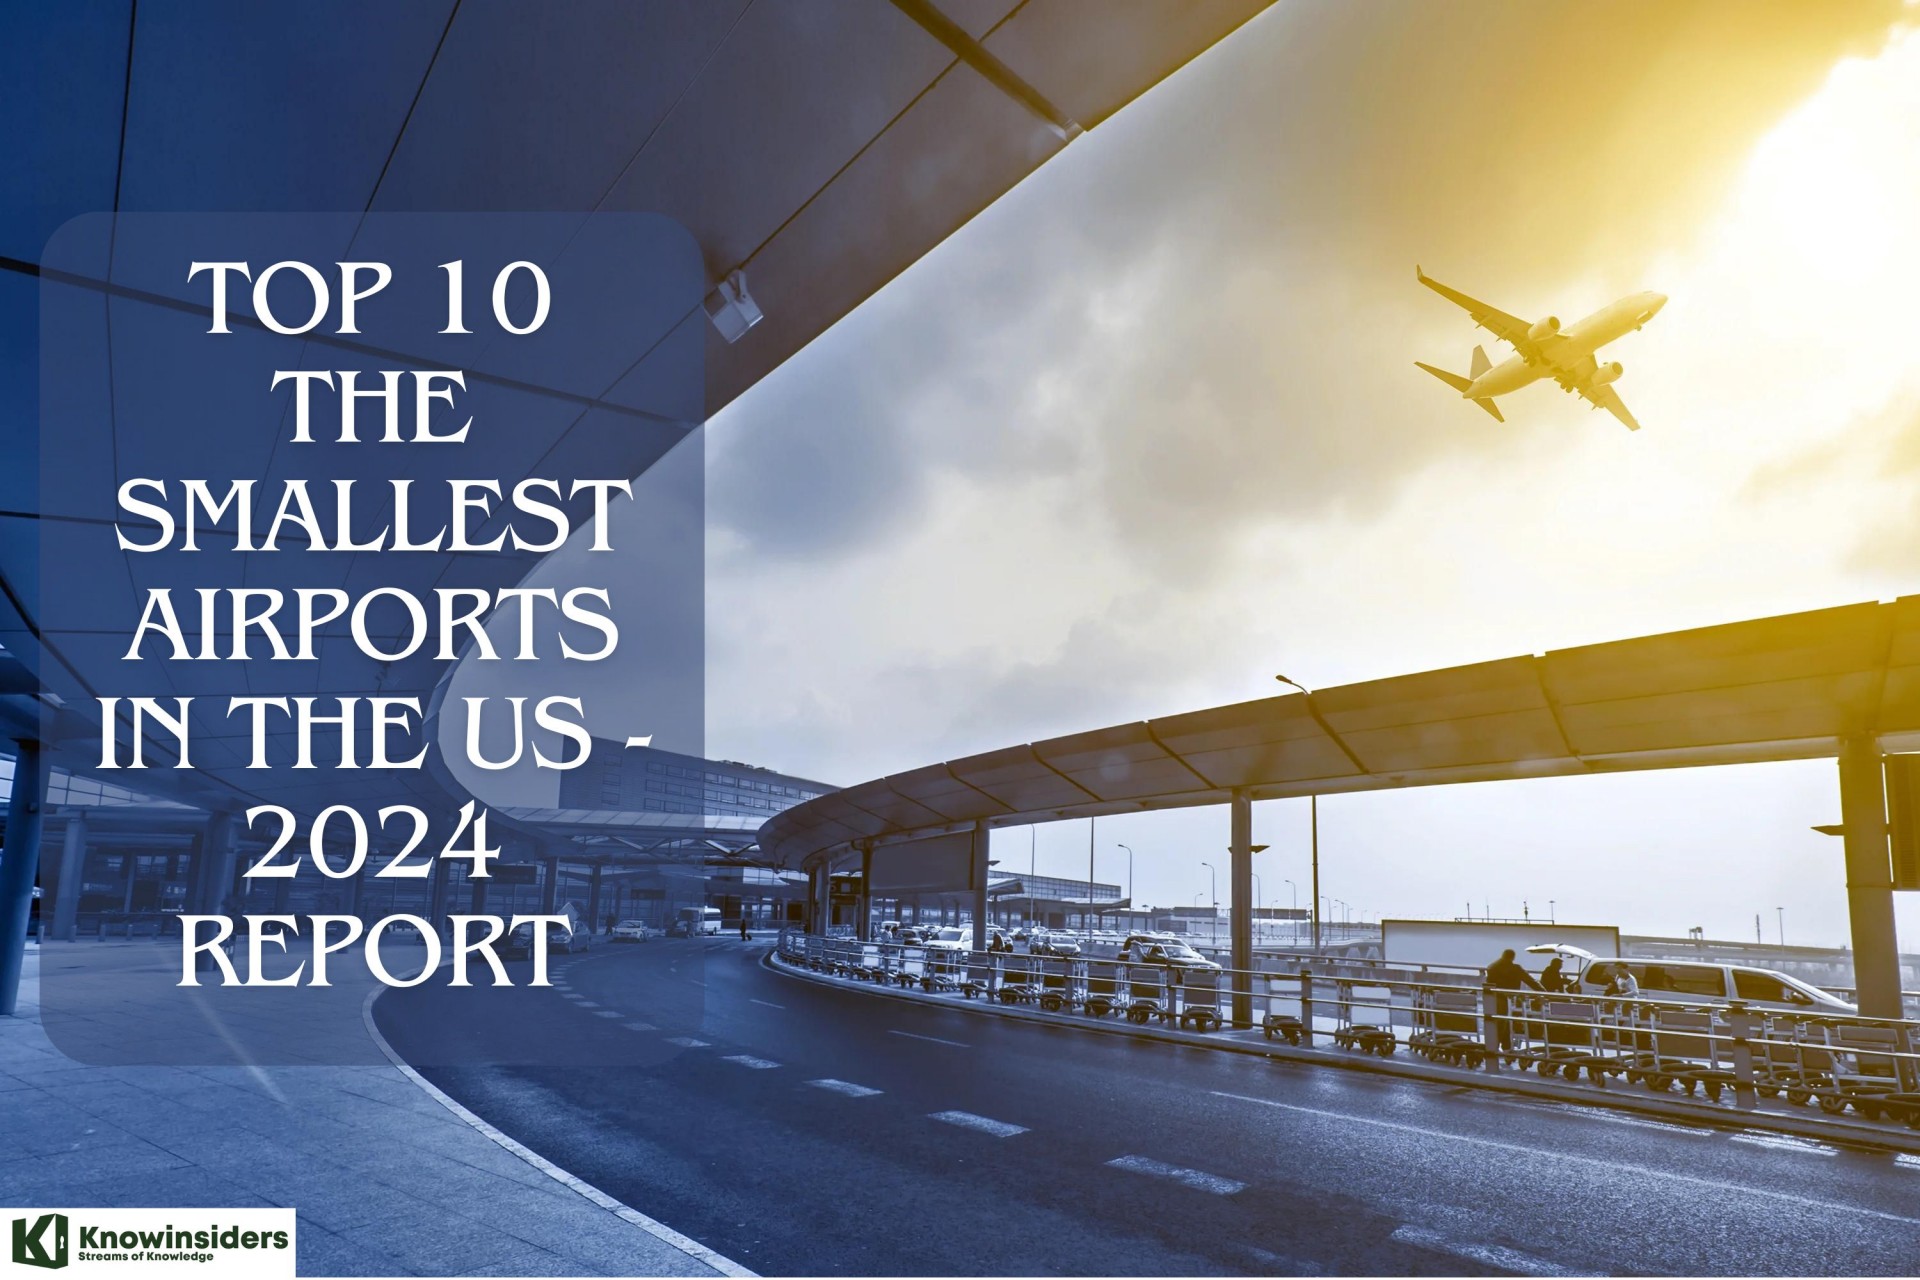 Top 10 Smallest Airports in the US by Area - 2024 Report